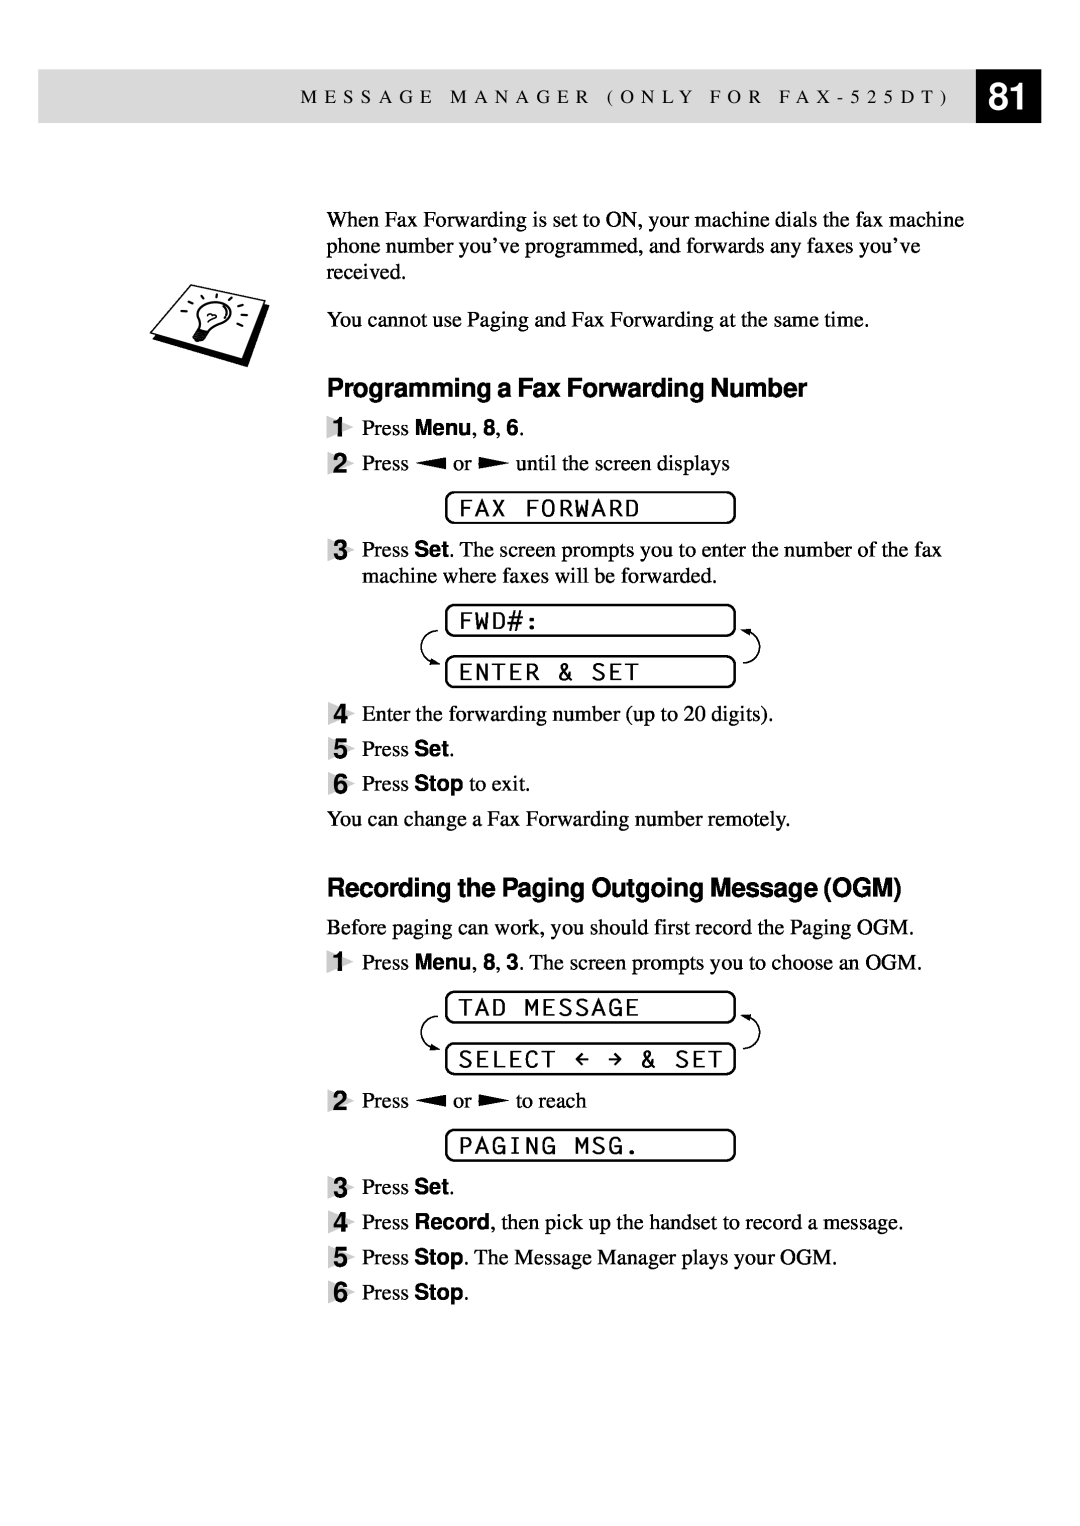 Brother 515 Programming a Fax Forwarding Number, Recording the Paging Outgoing Message OGM, Fwd# Enter & Set, Paging Msg 